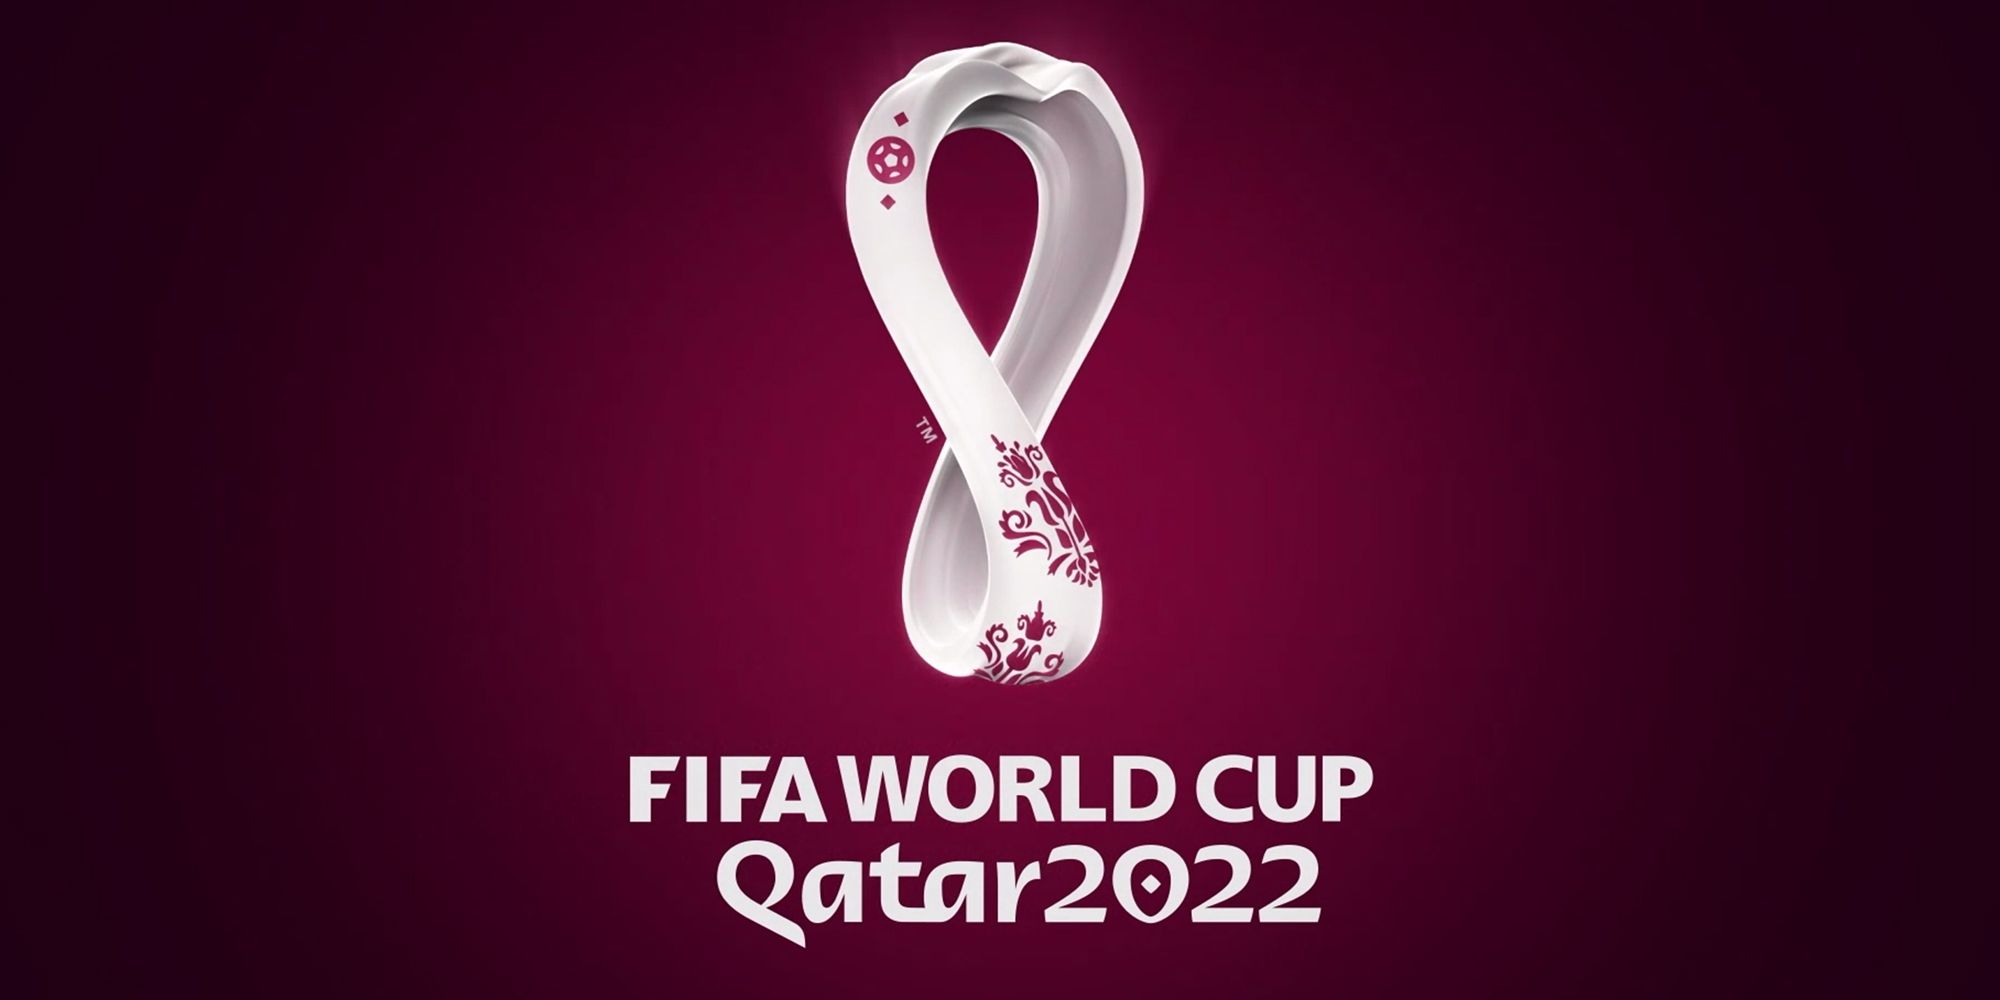 Will FIFA 22 have a World Cup mode? Ultimate Team add-on rumors